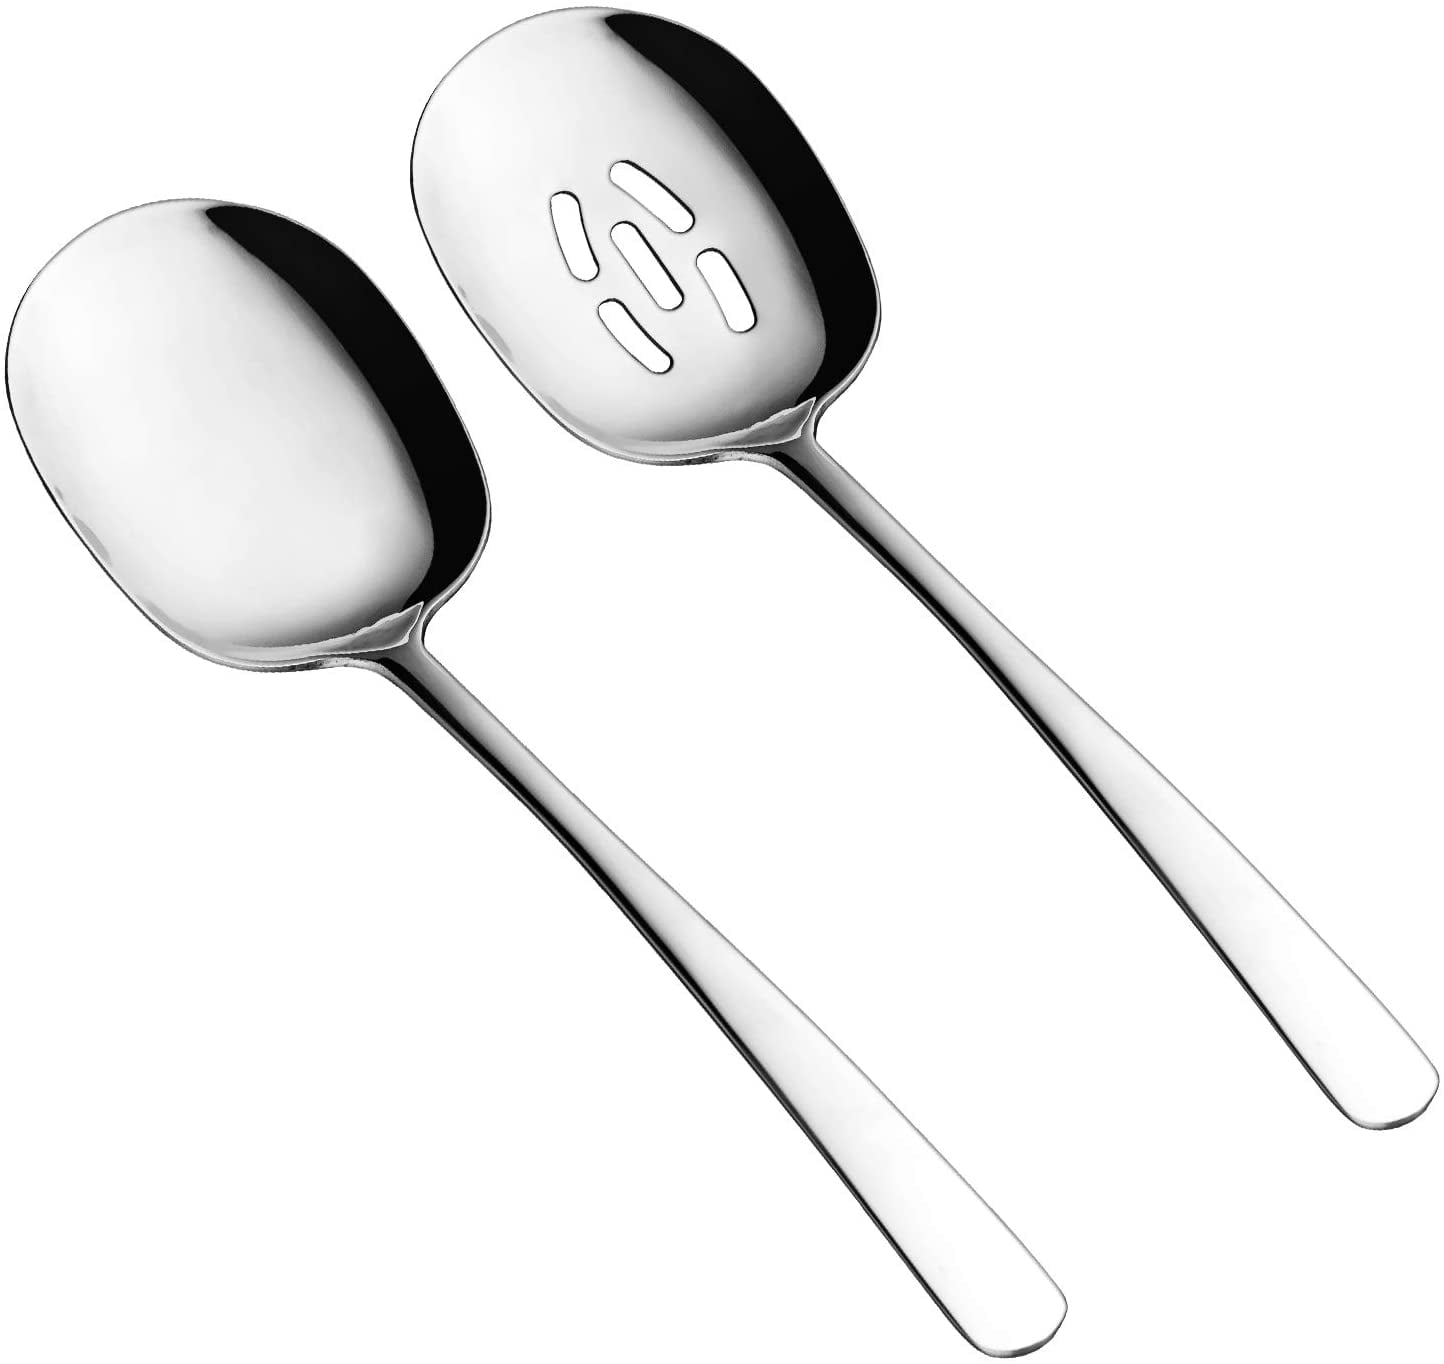 Large Serving Spoon Set Slotted Spoon And Serving Spoon High Quality Spoon Silverware Cooking